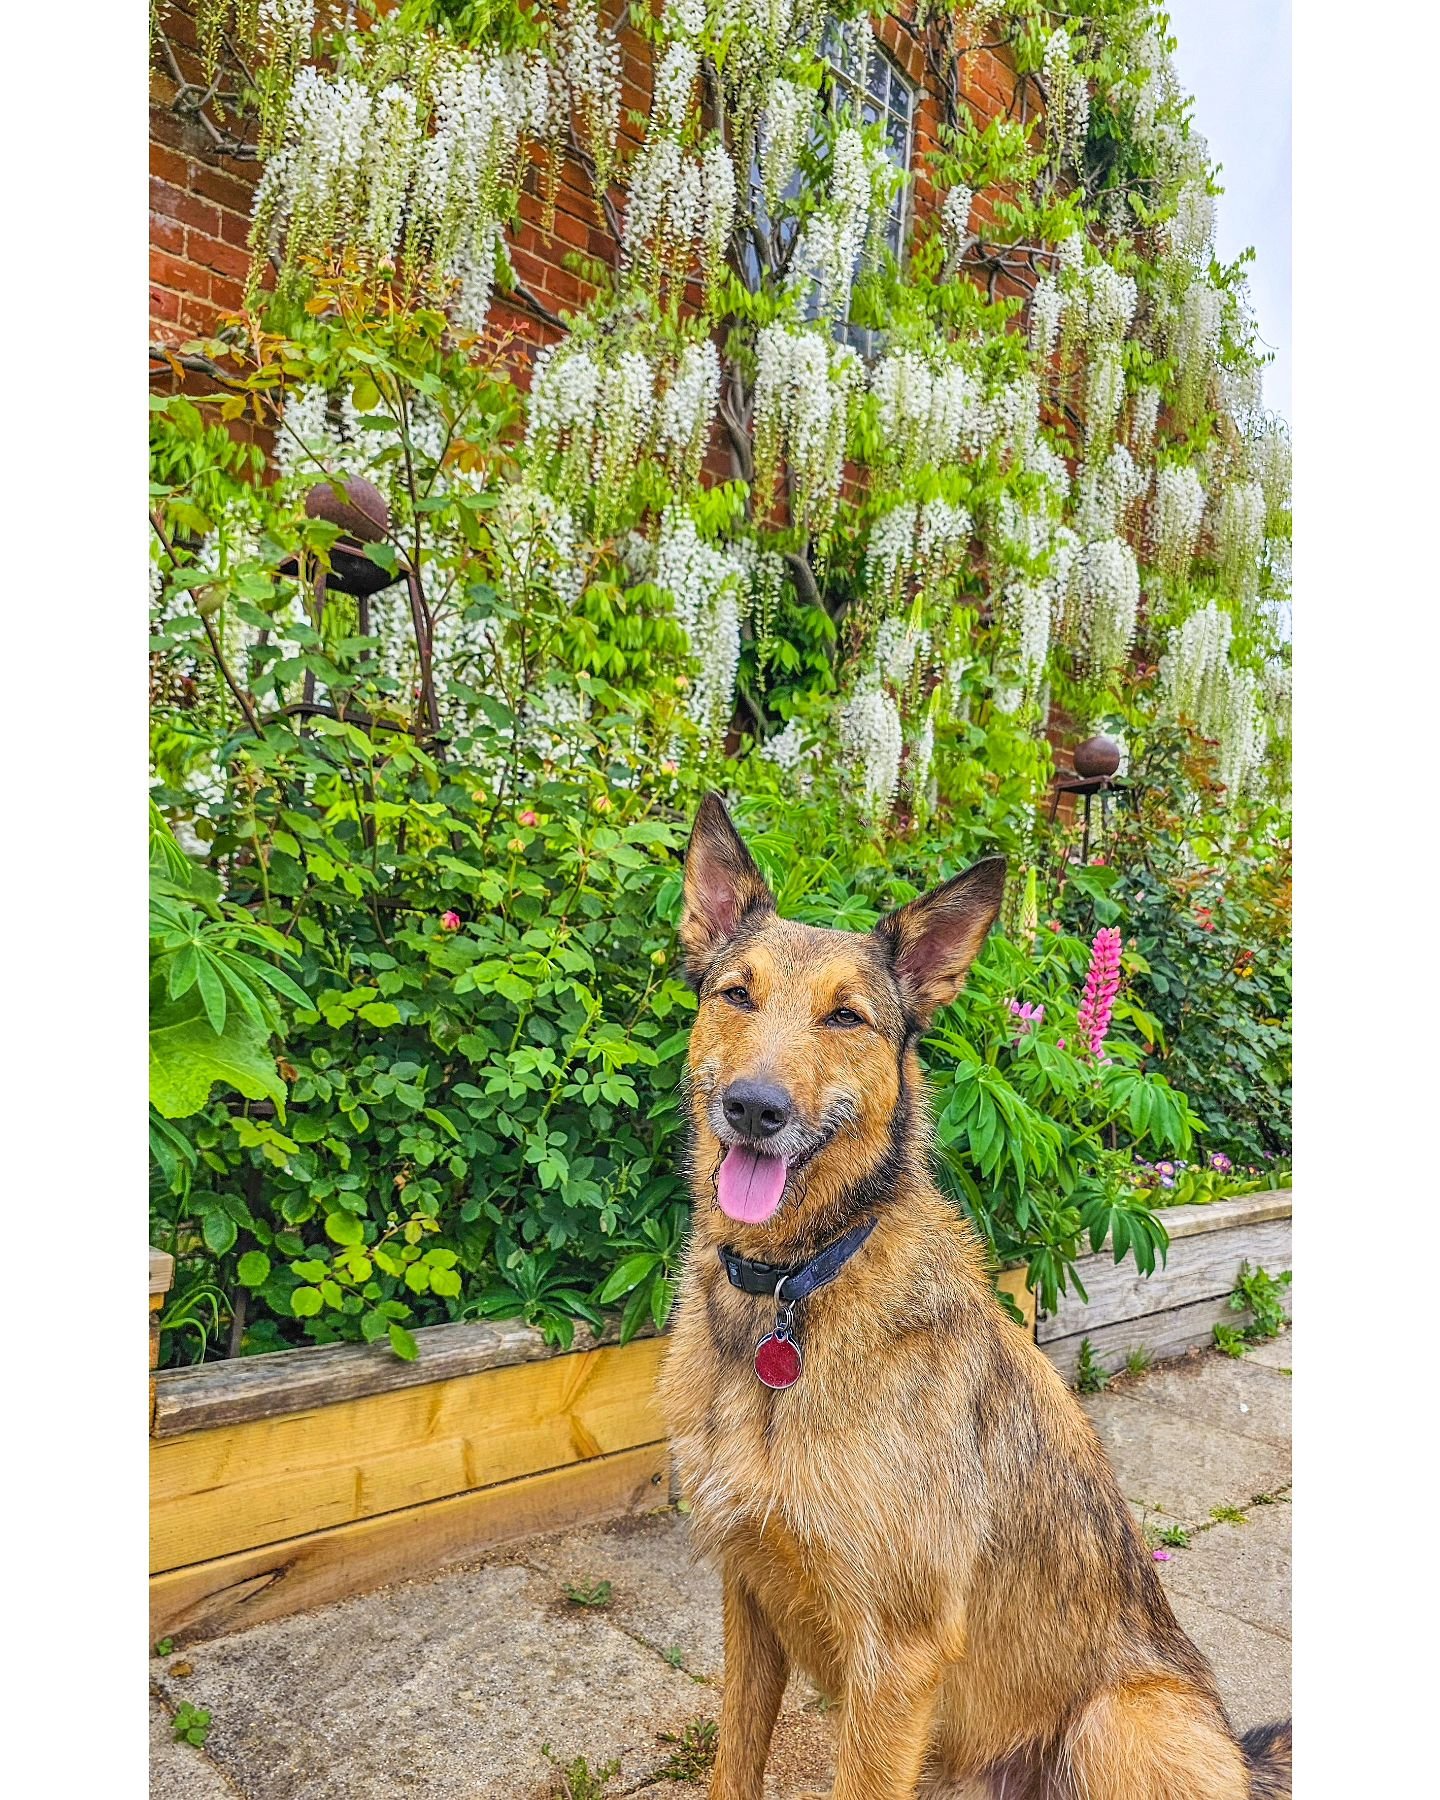 The most beautiful boy 😍 Max brings people together and makes everyone fall in love with him. It's so good to see him again 🥰 Not only do I love that gorgeous face, but let's take a moment to check out that incredible wisteria too! Absolute beautie